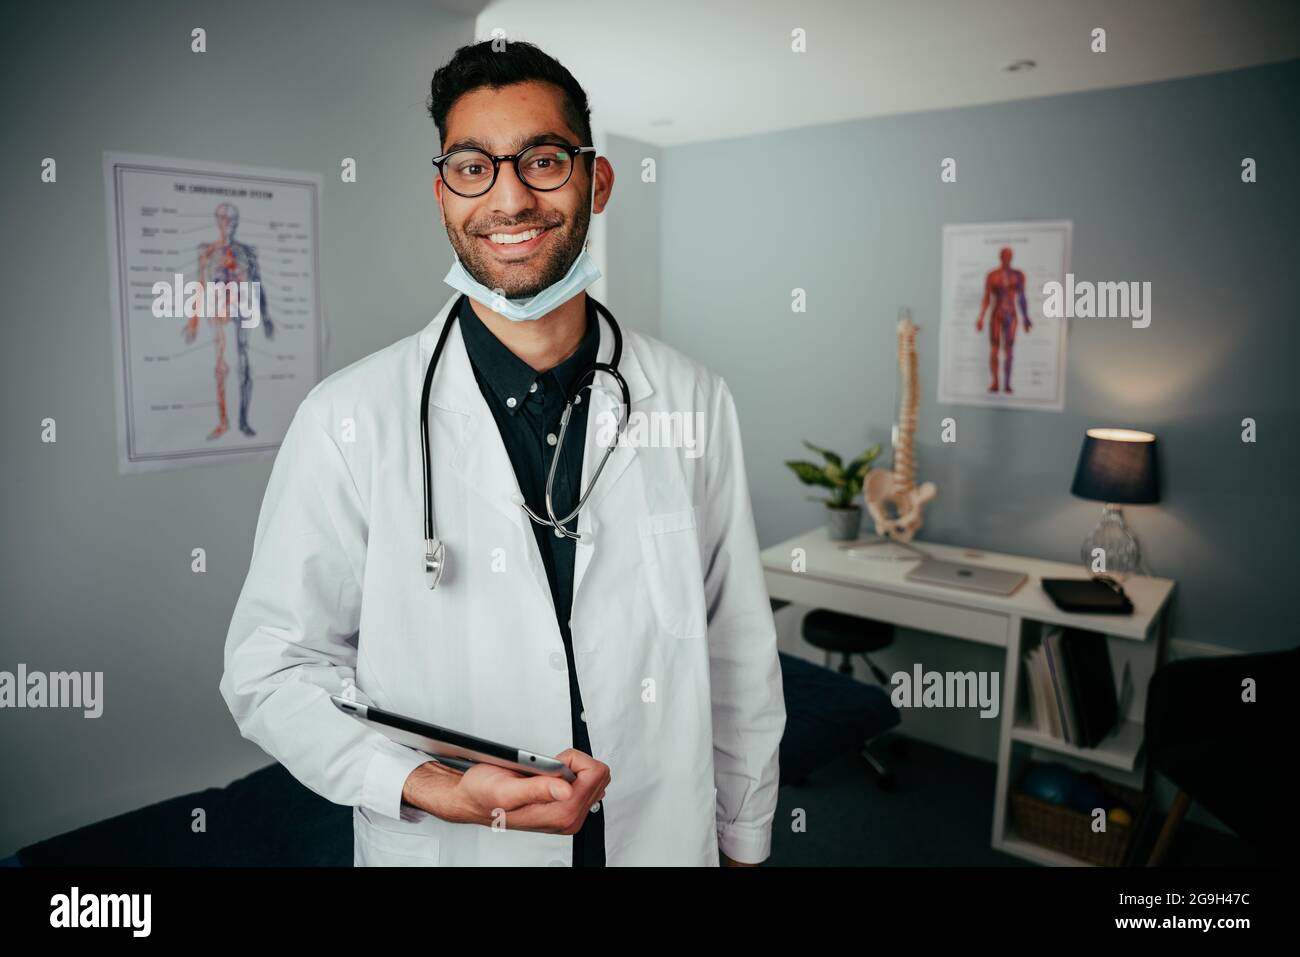 Mixed race male doctor working in office smiling while holding digital tablet Stock Photo